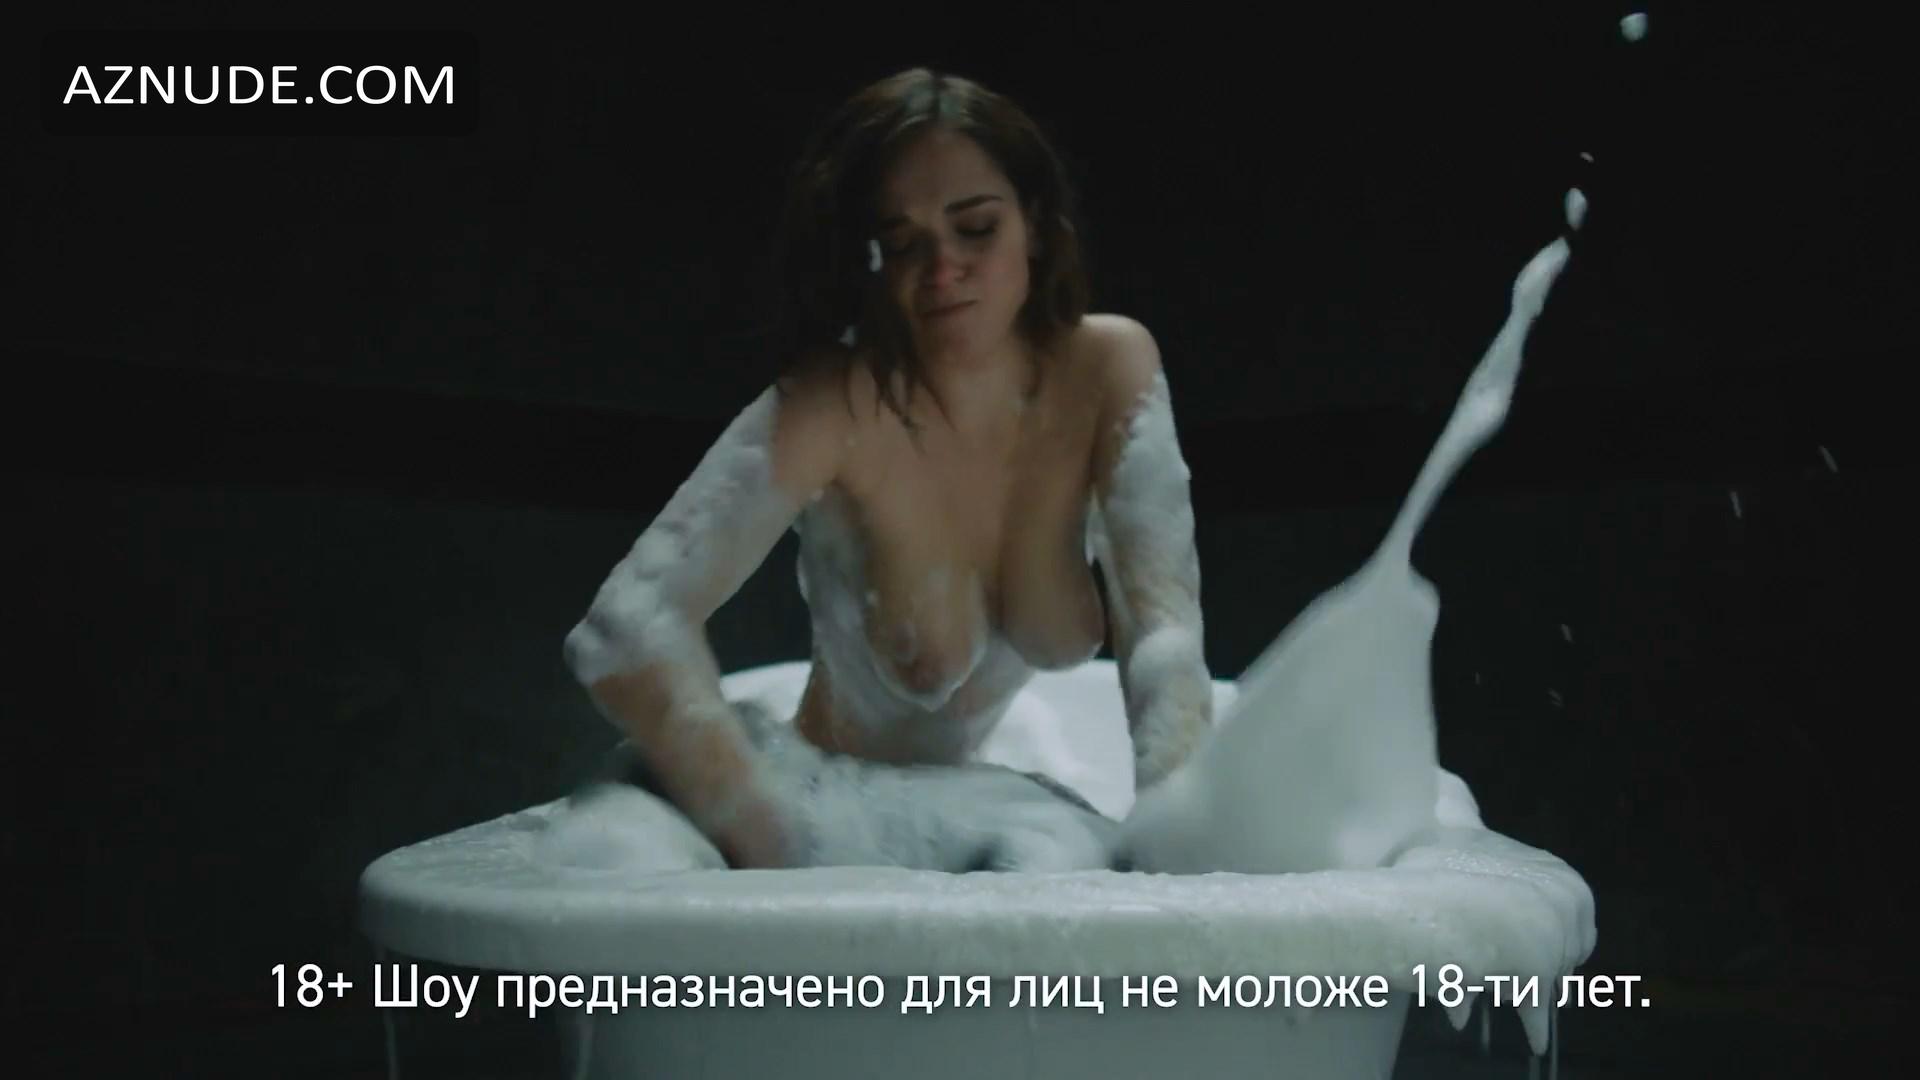 Sofia Sinitsyna In Online Premium Project About Sex Without Censorship